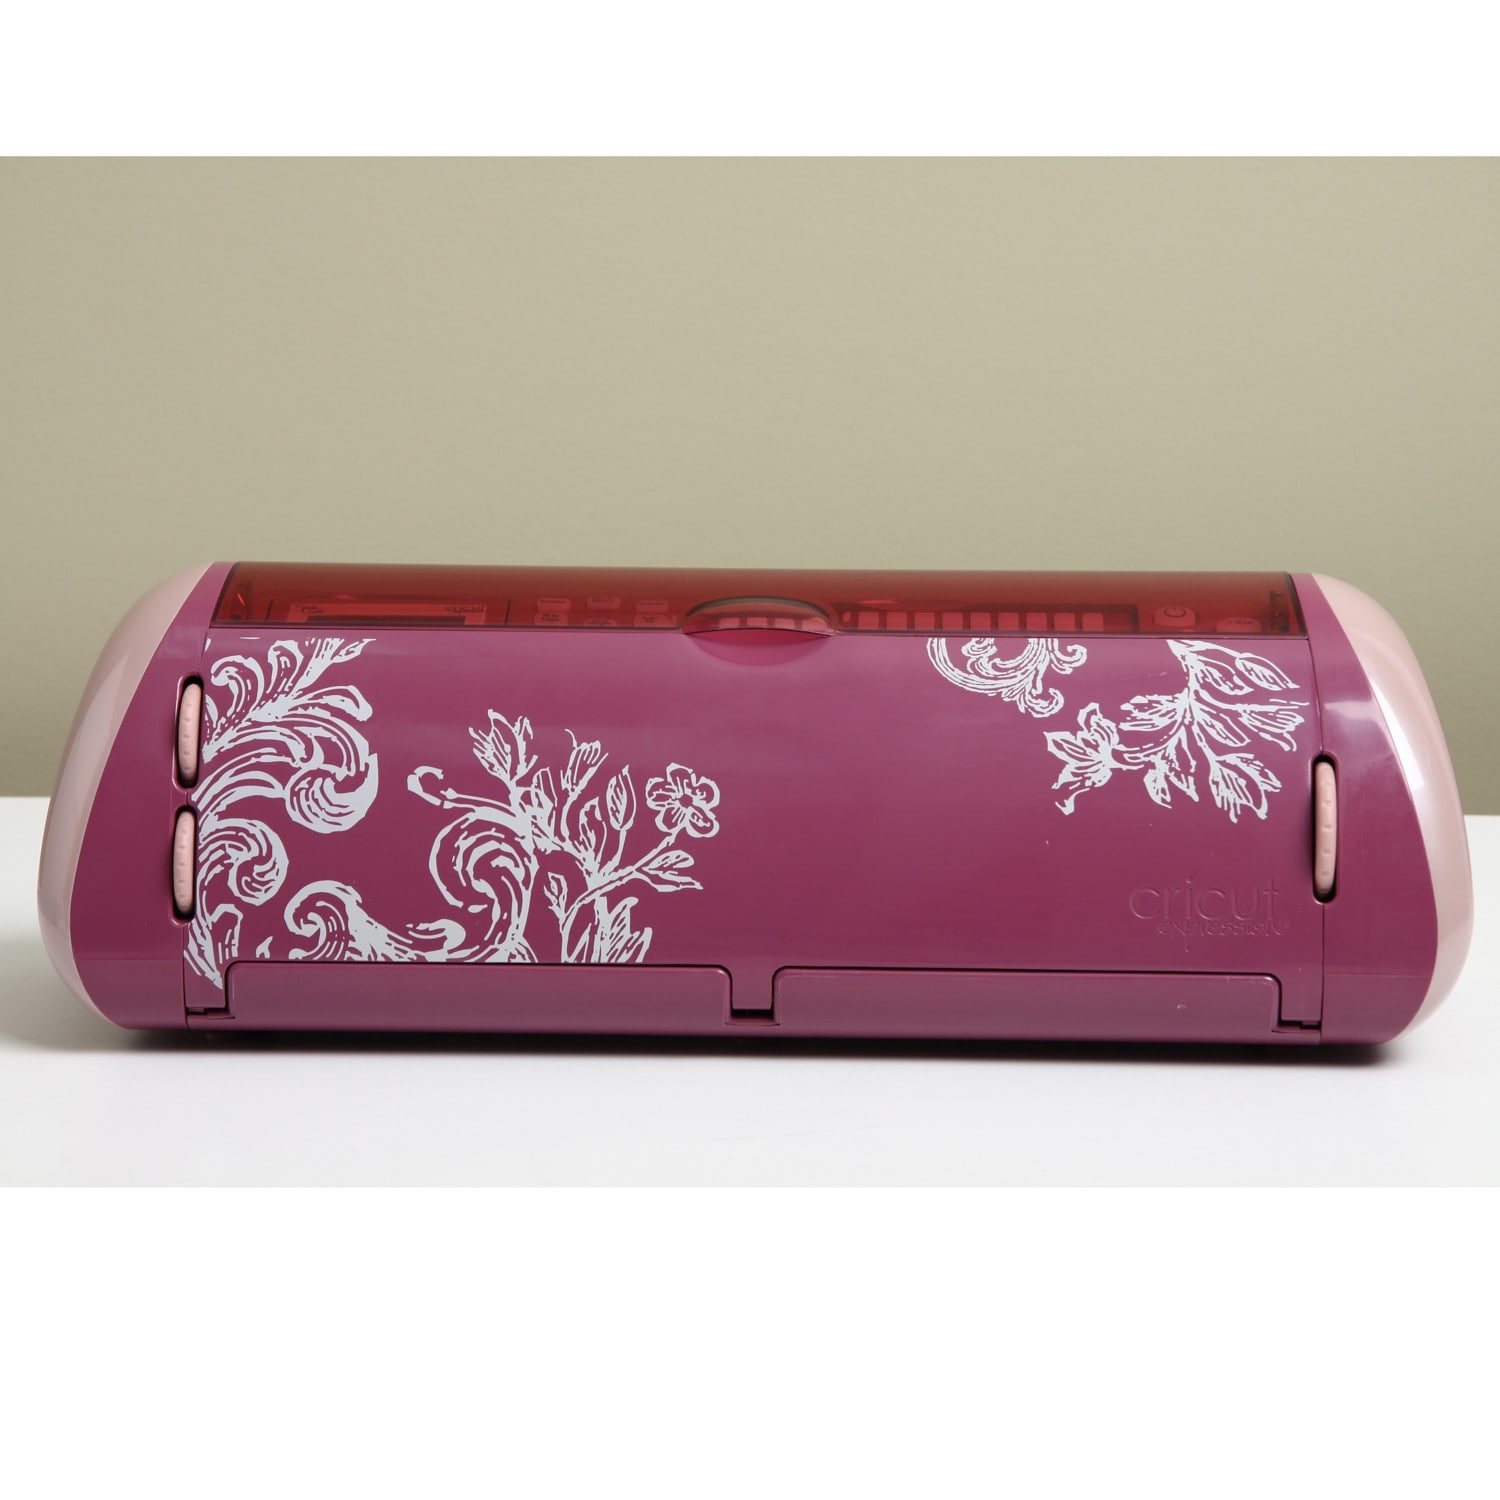 Cricut Expression Plum Die Cutting Machine with Two Cartridges - Bed Bath &  Beyond - 6612360